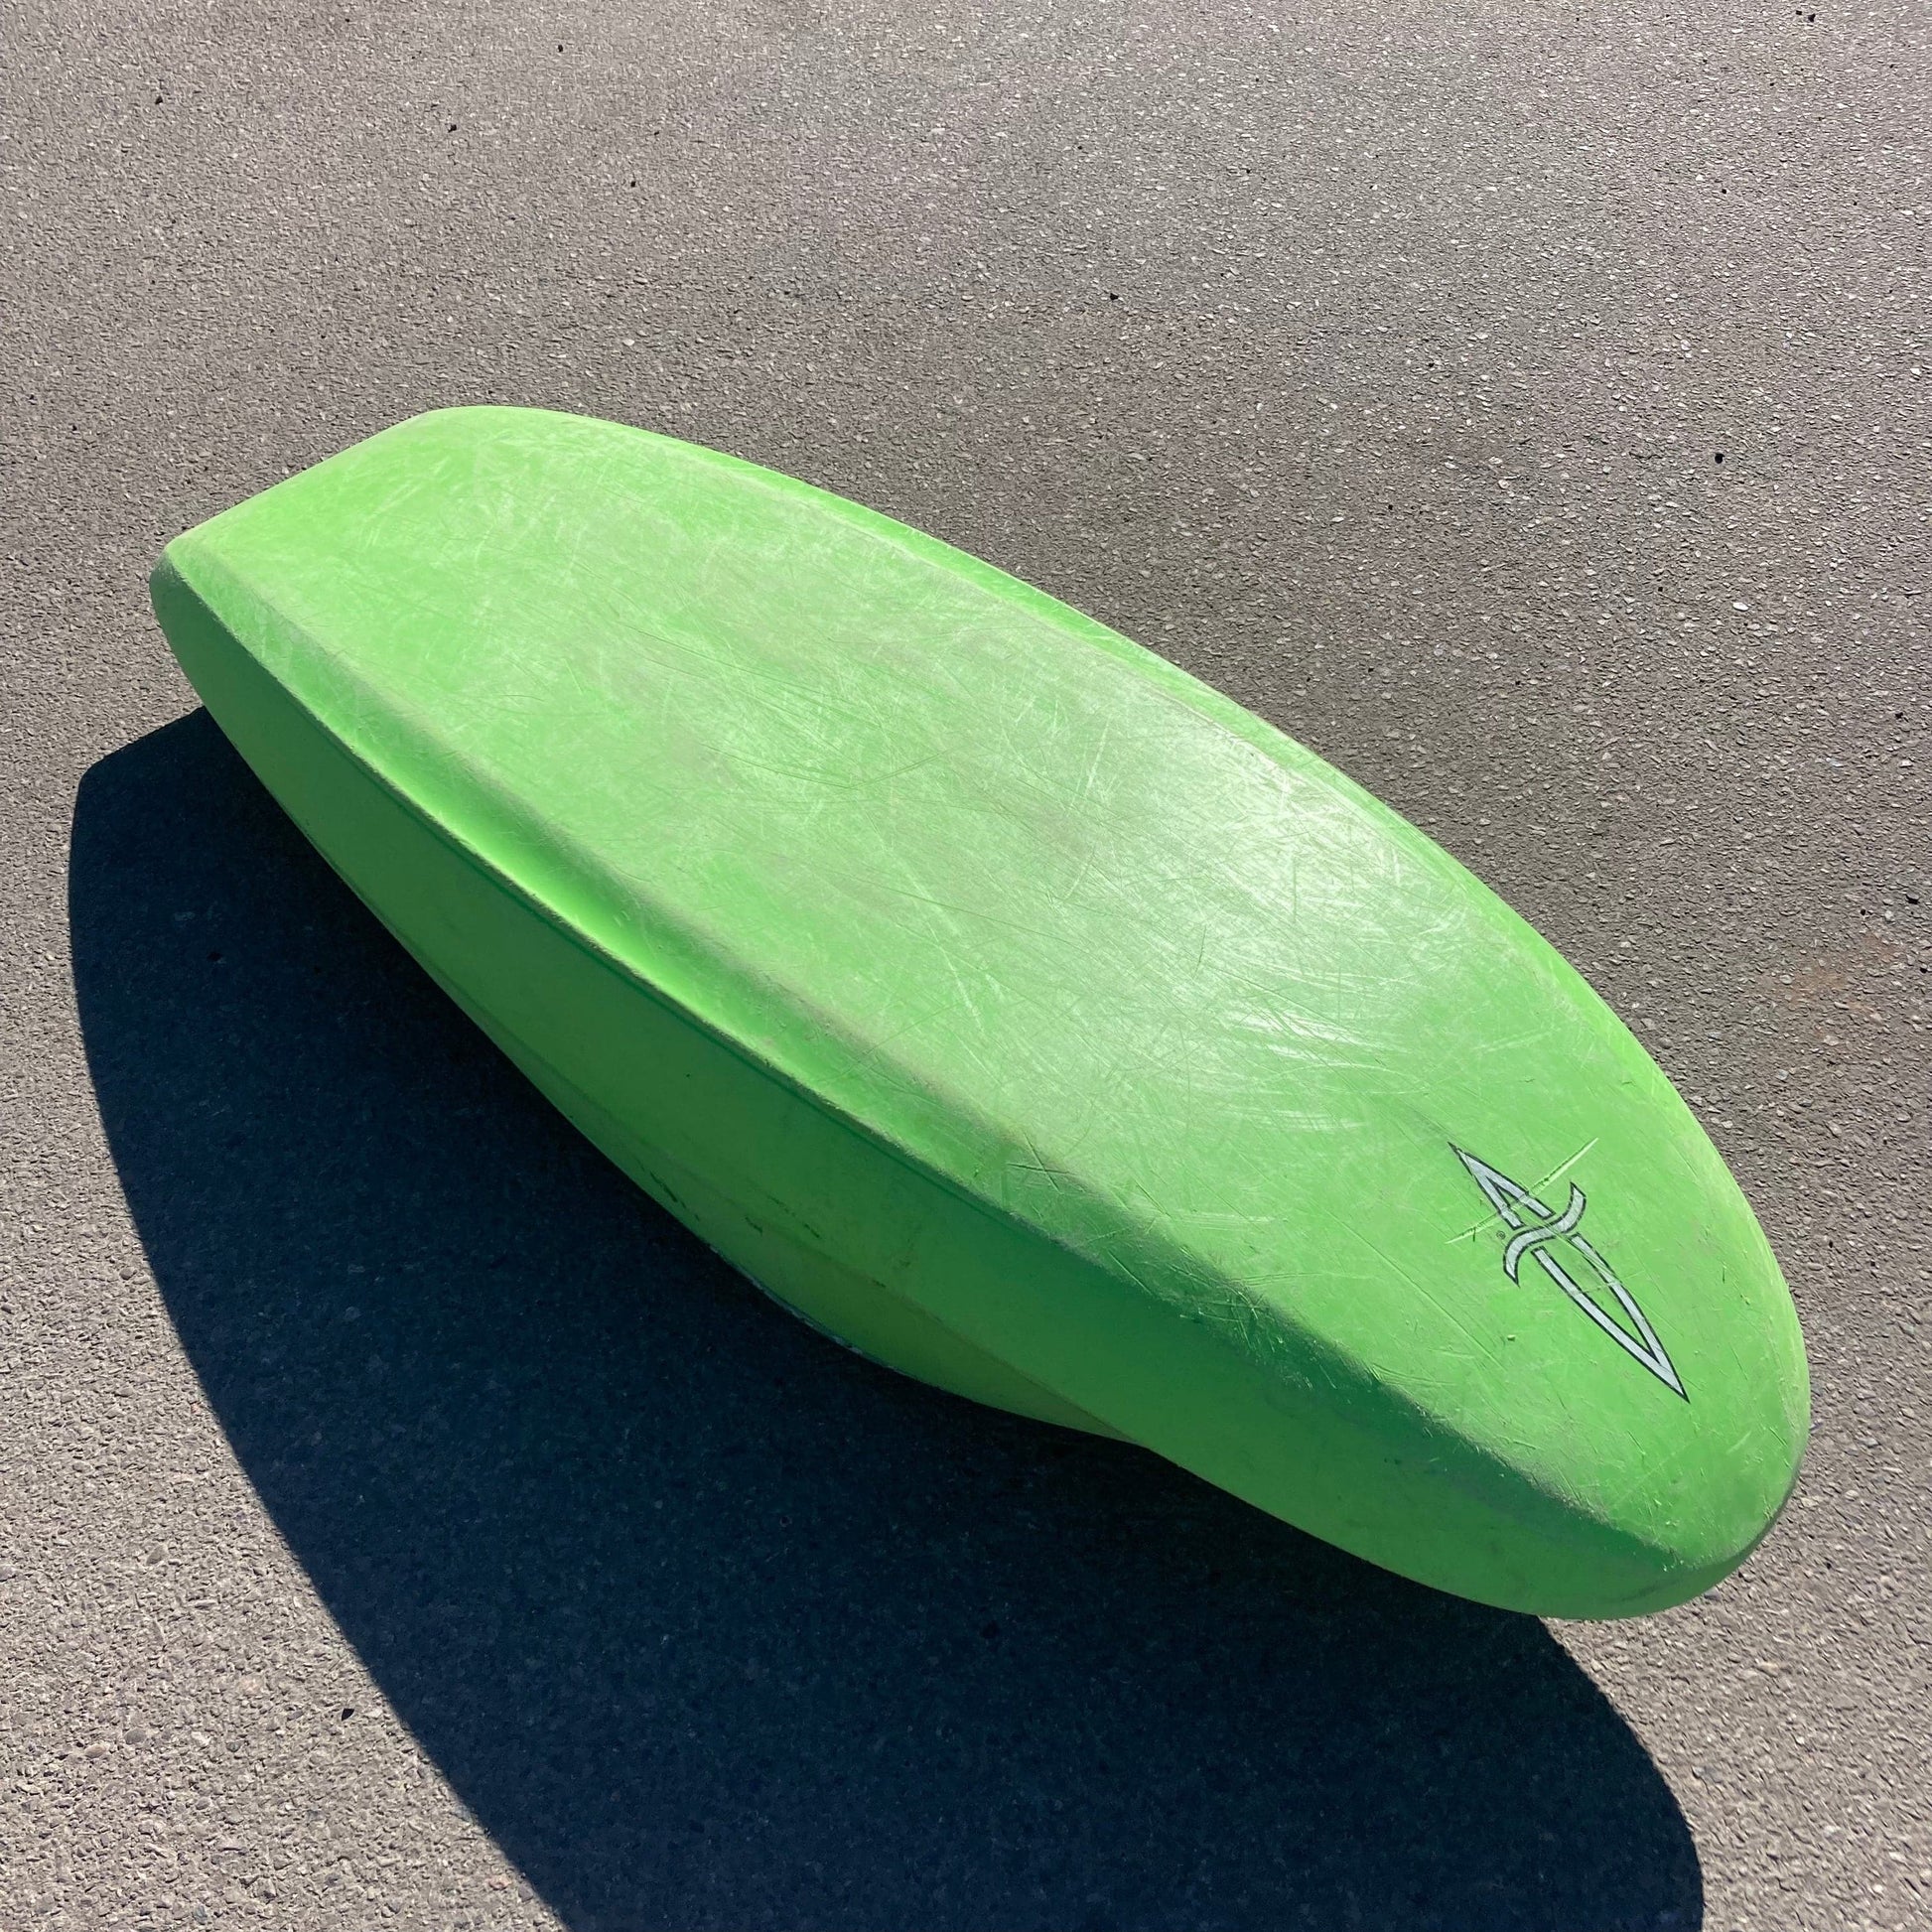 A green surfboard, a demo model for the Dagger Consignment Jitsu 5.9 playboat, laying on the ground.